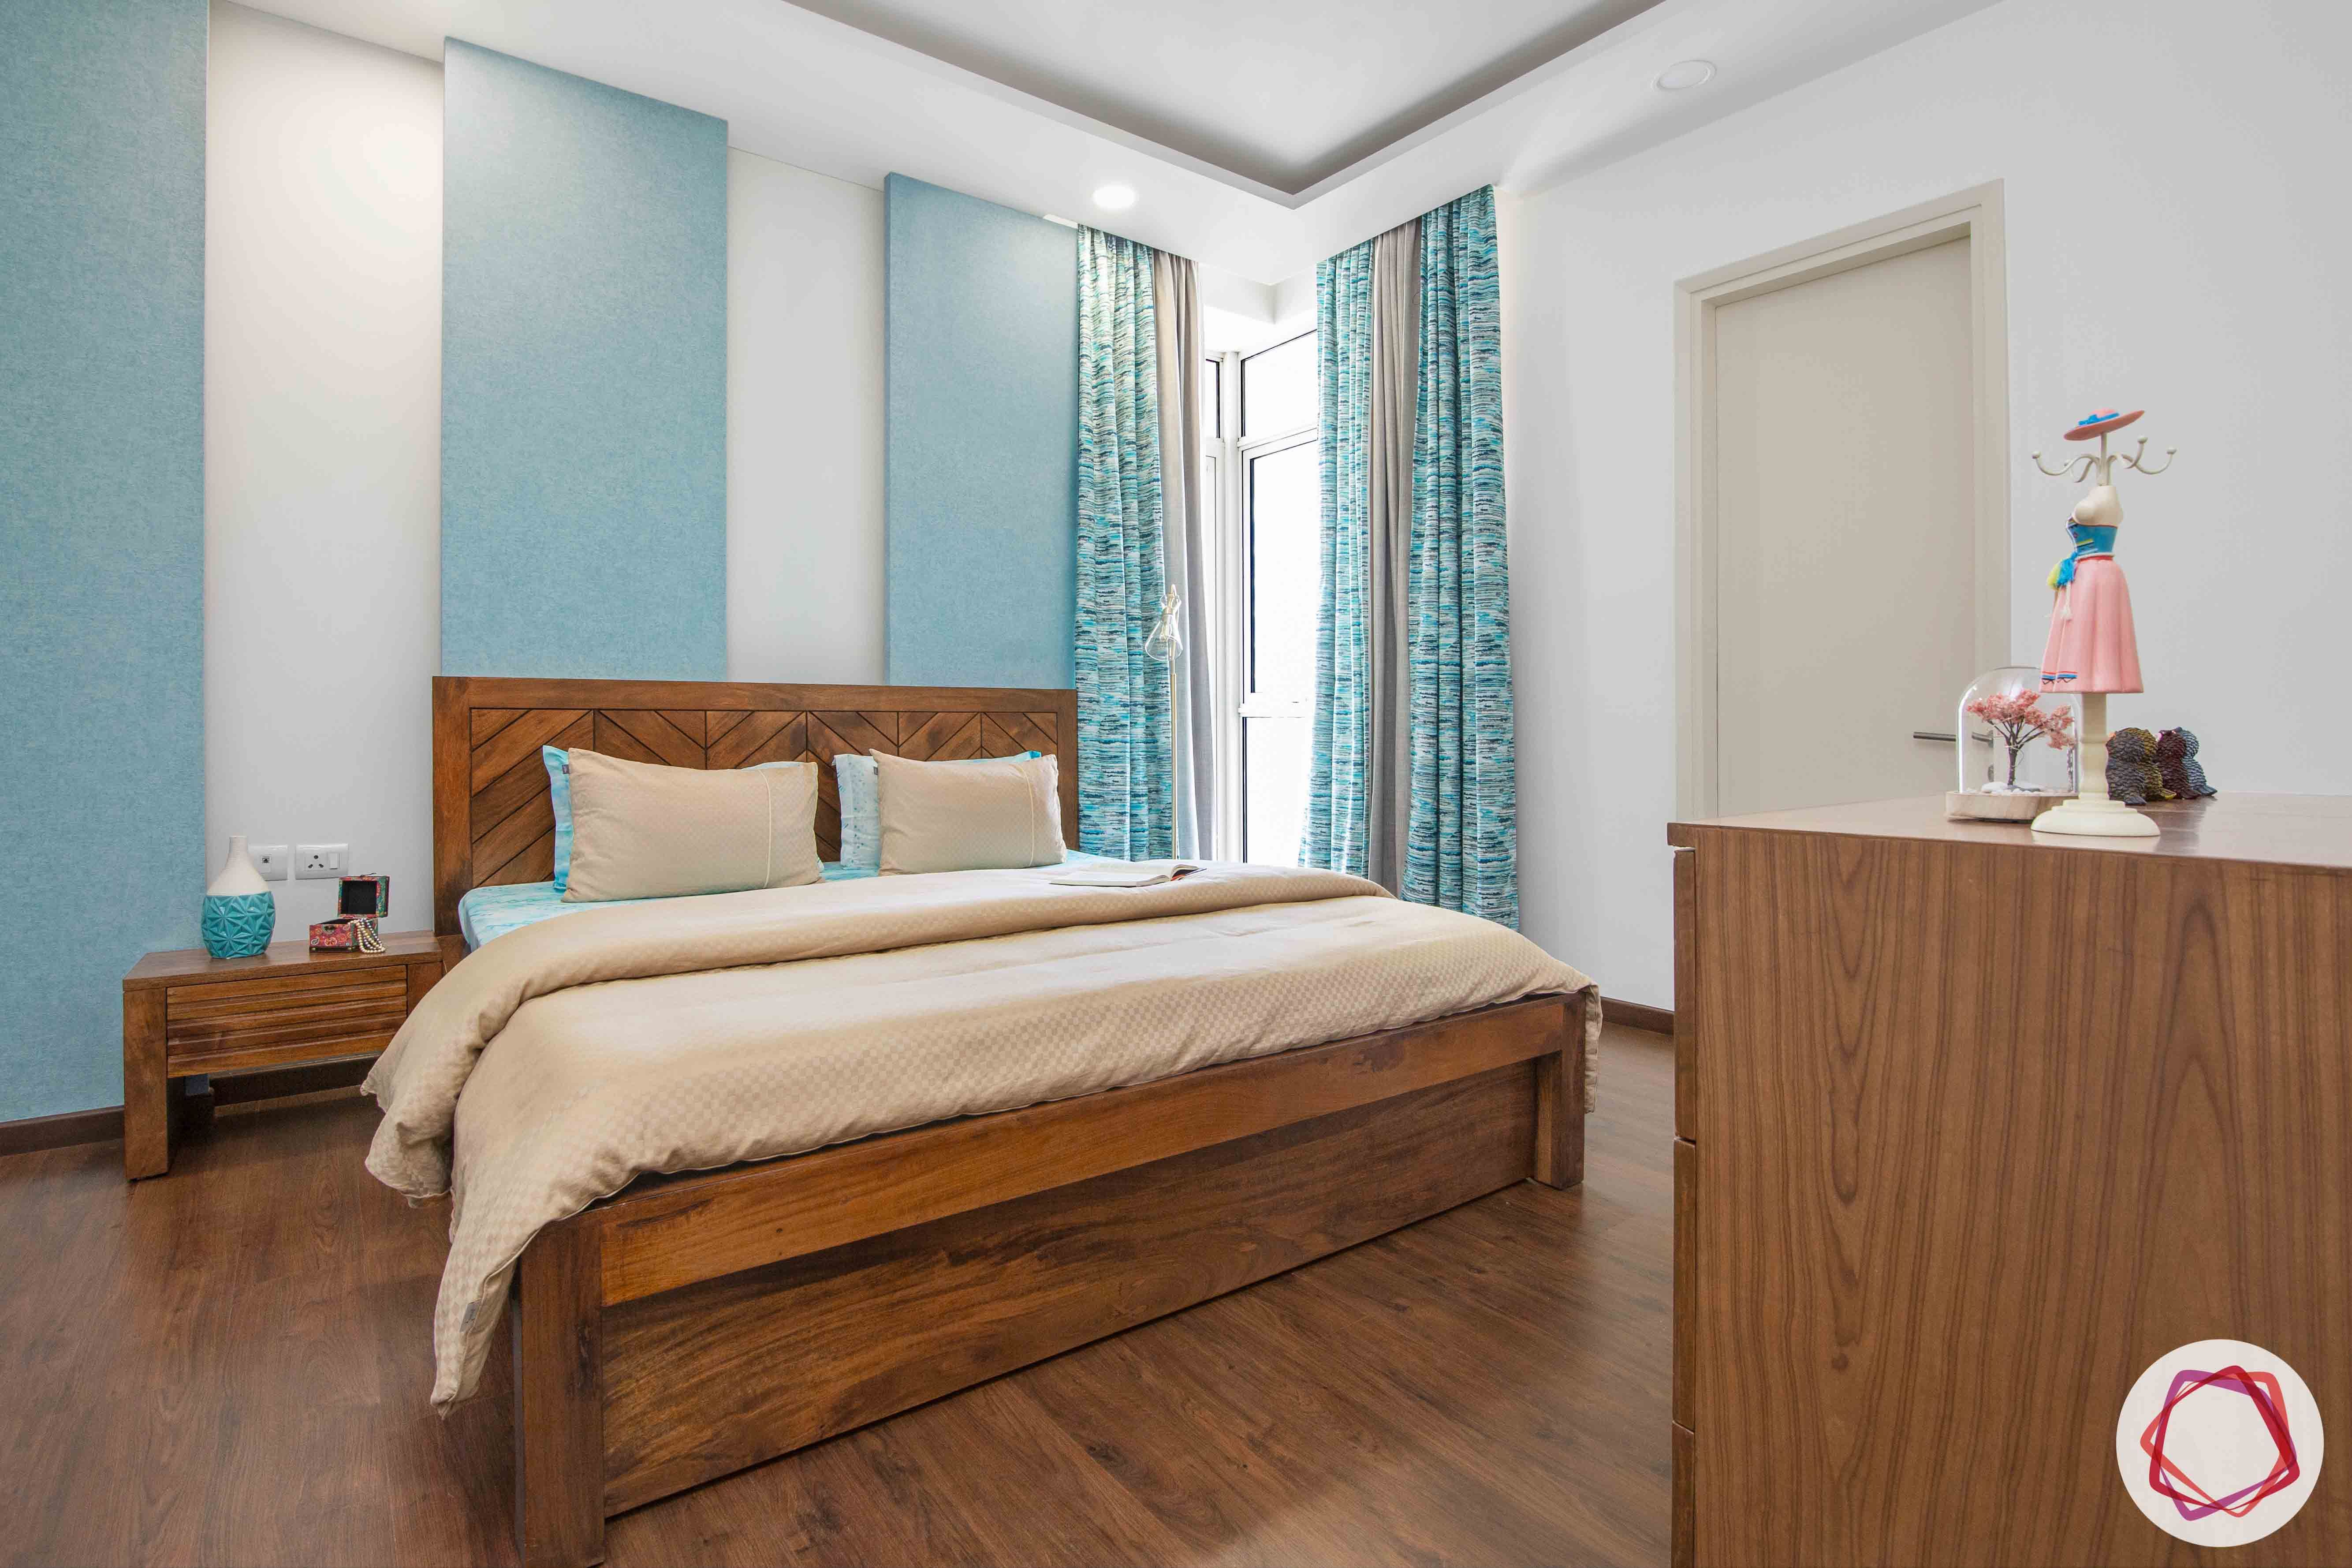 ireo victory valley-master bedroom-blue wall panels-wooden bed